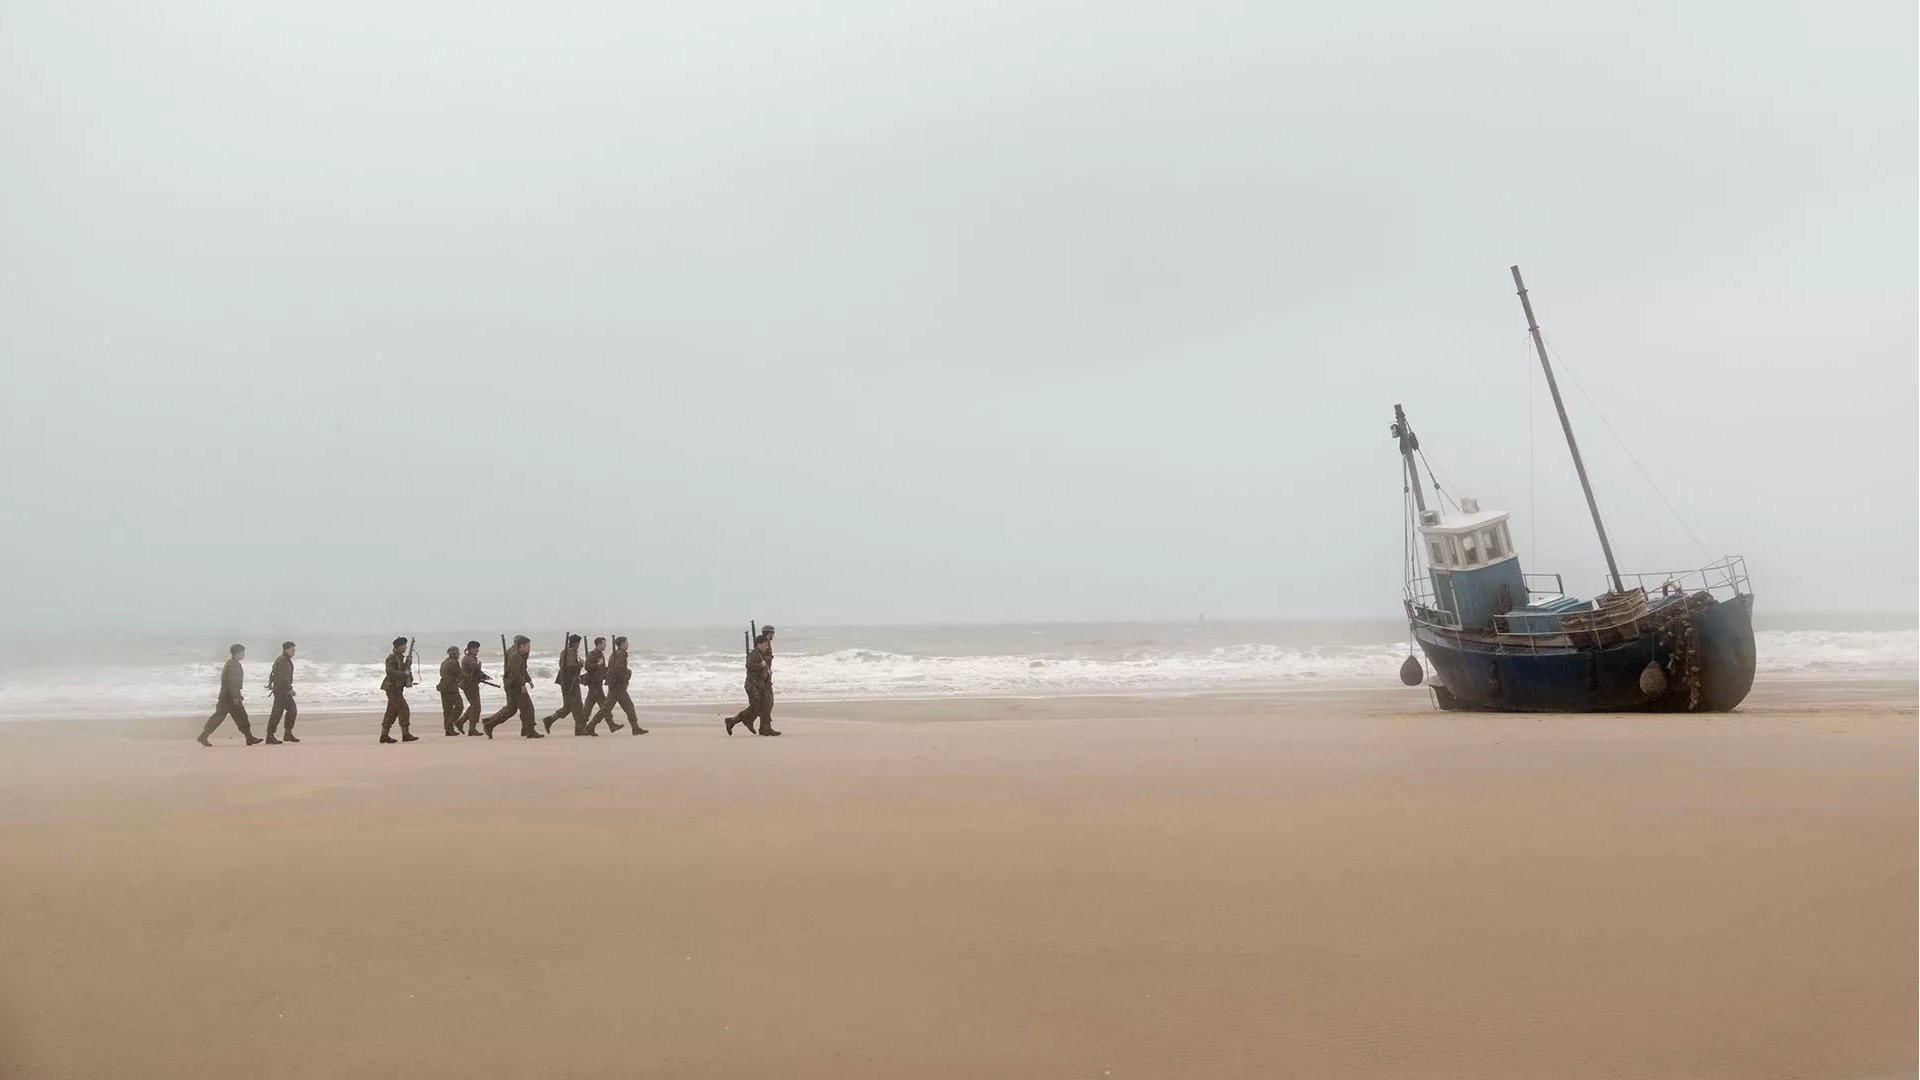 DUNKIRK film still of soldiers on a beach